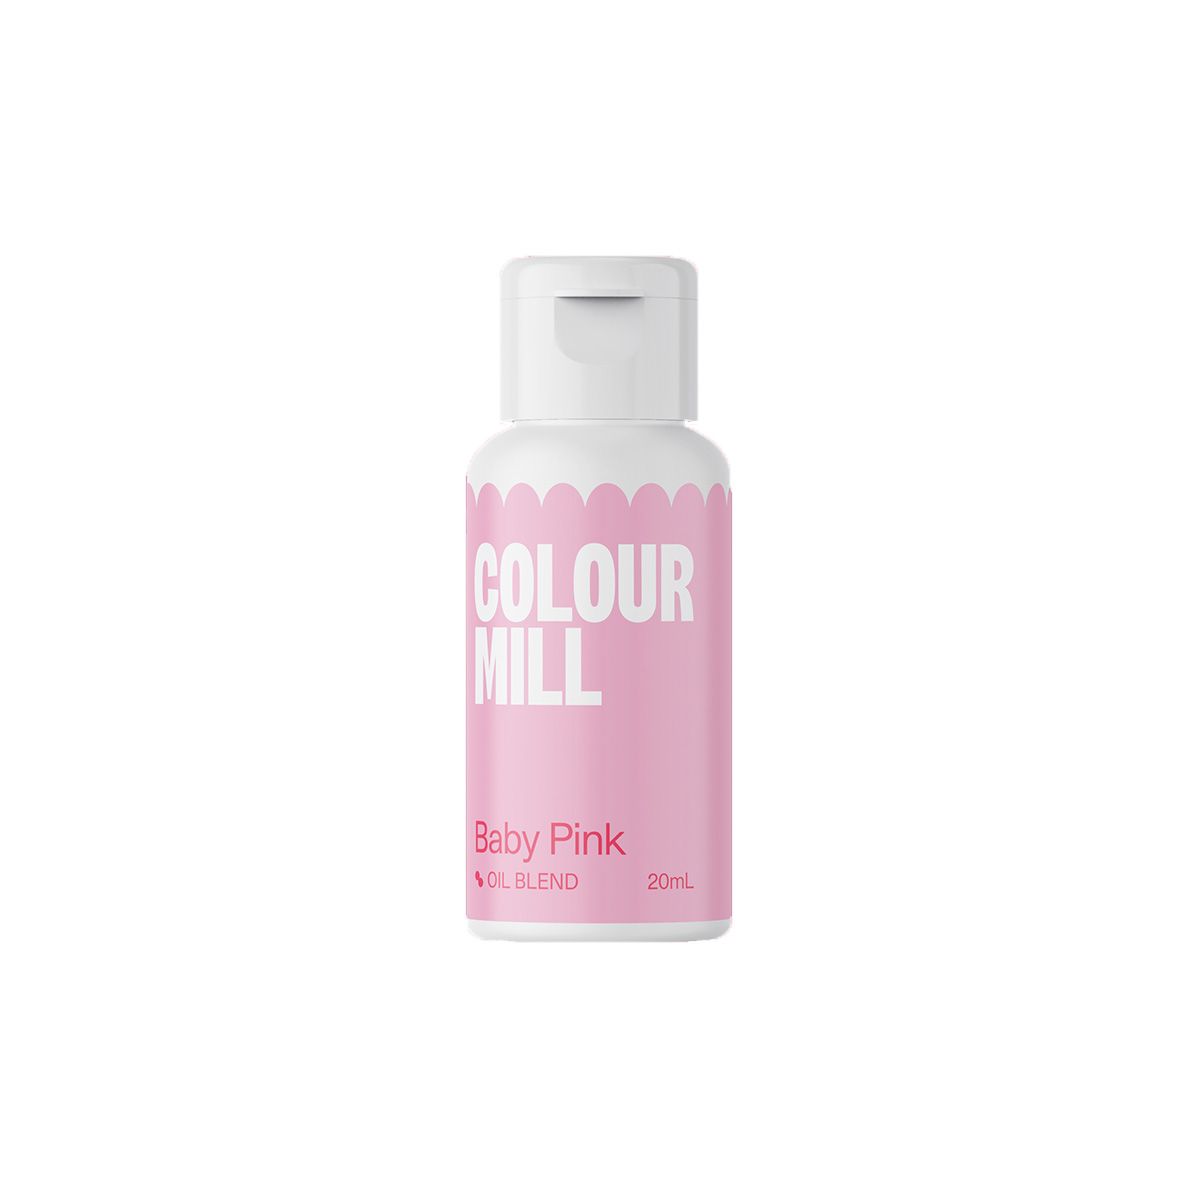  Foto: COLOUR MILL OIL BLEND BABY PINK 20 ML